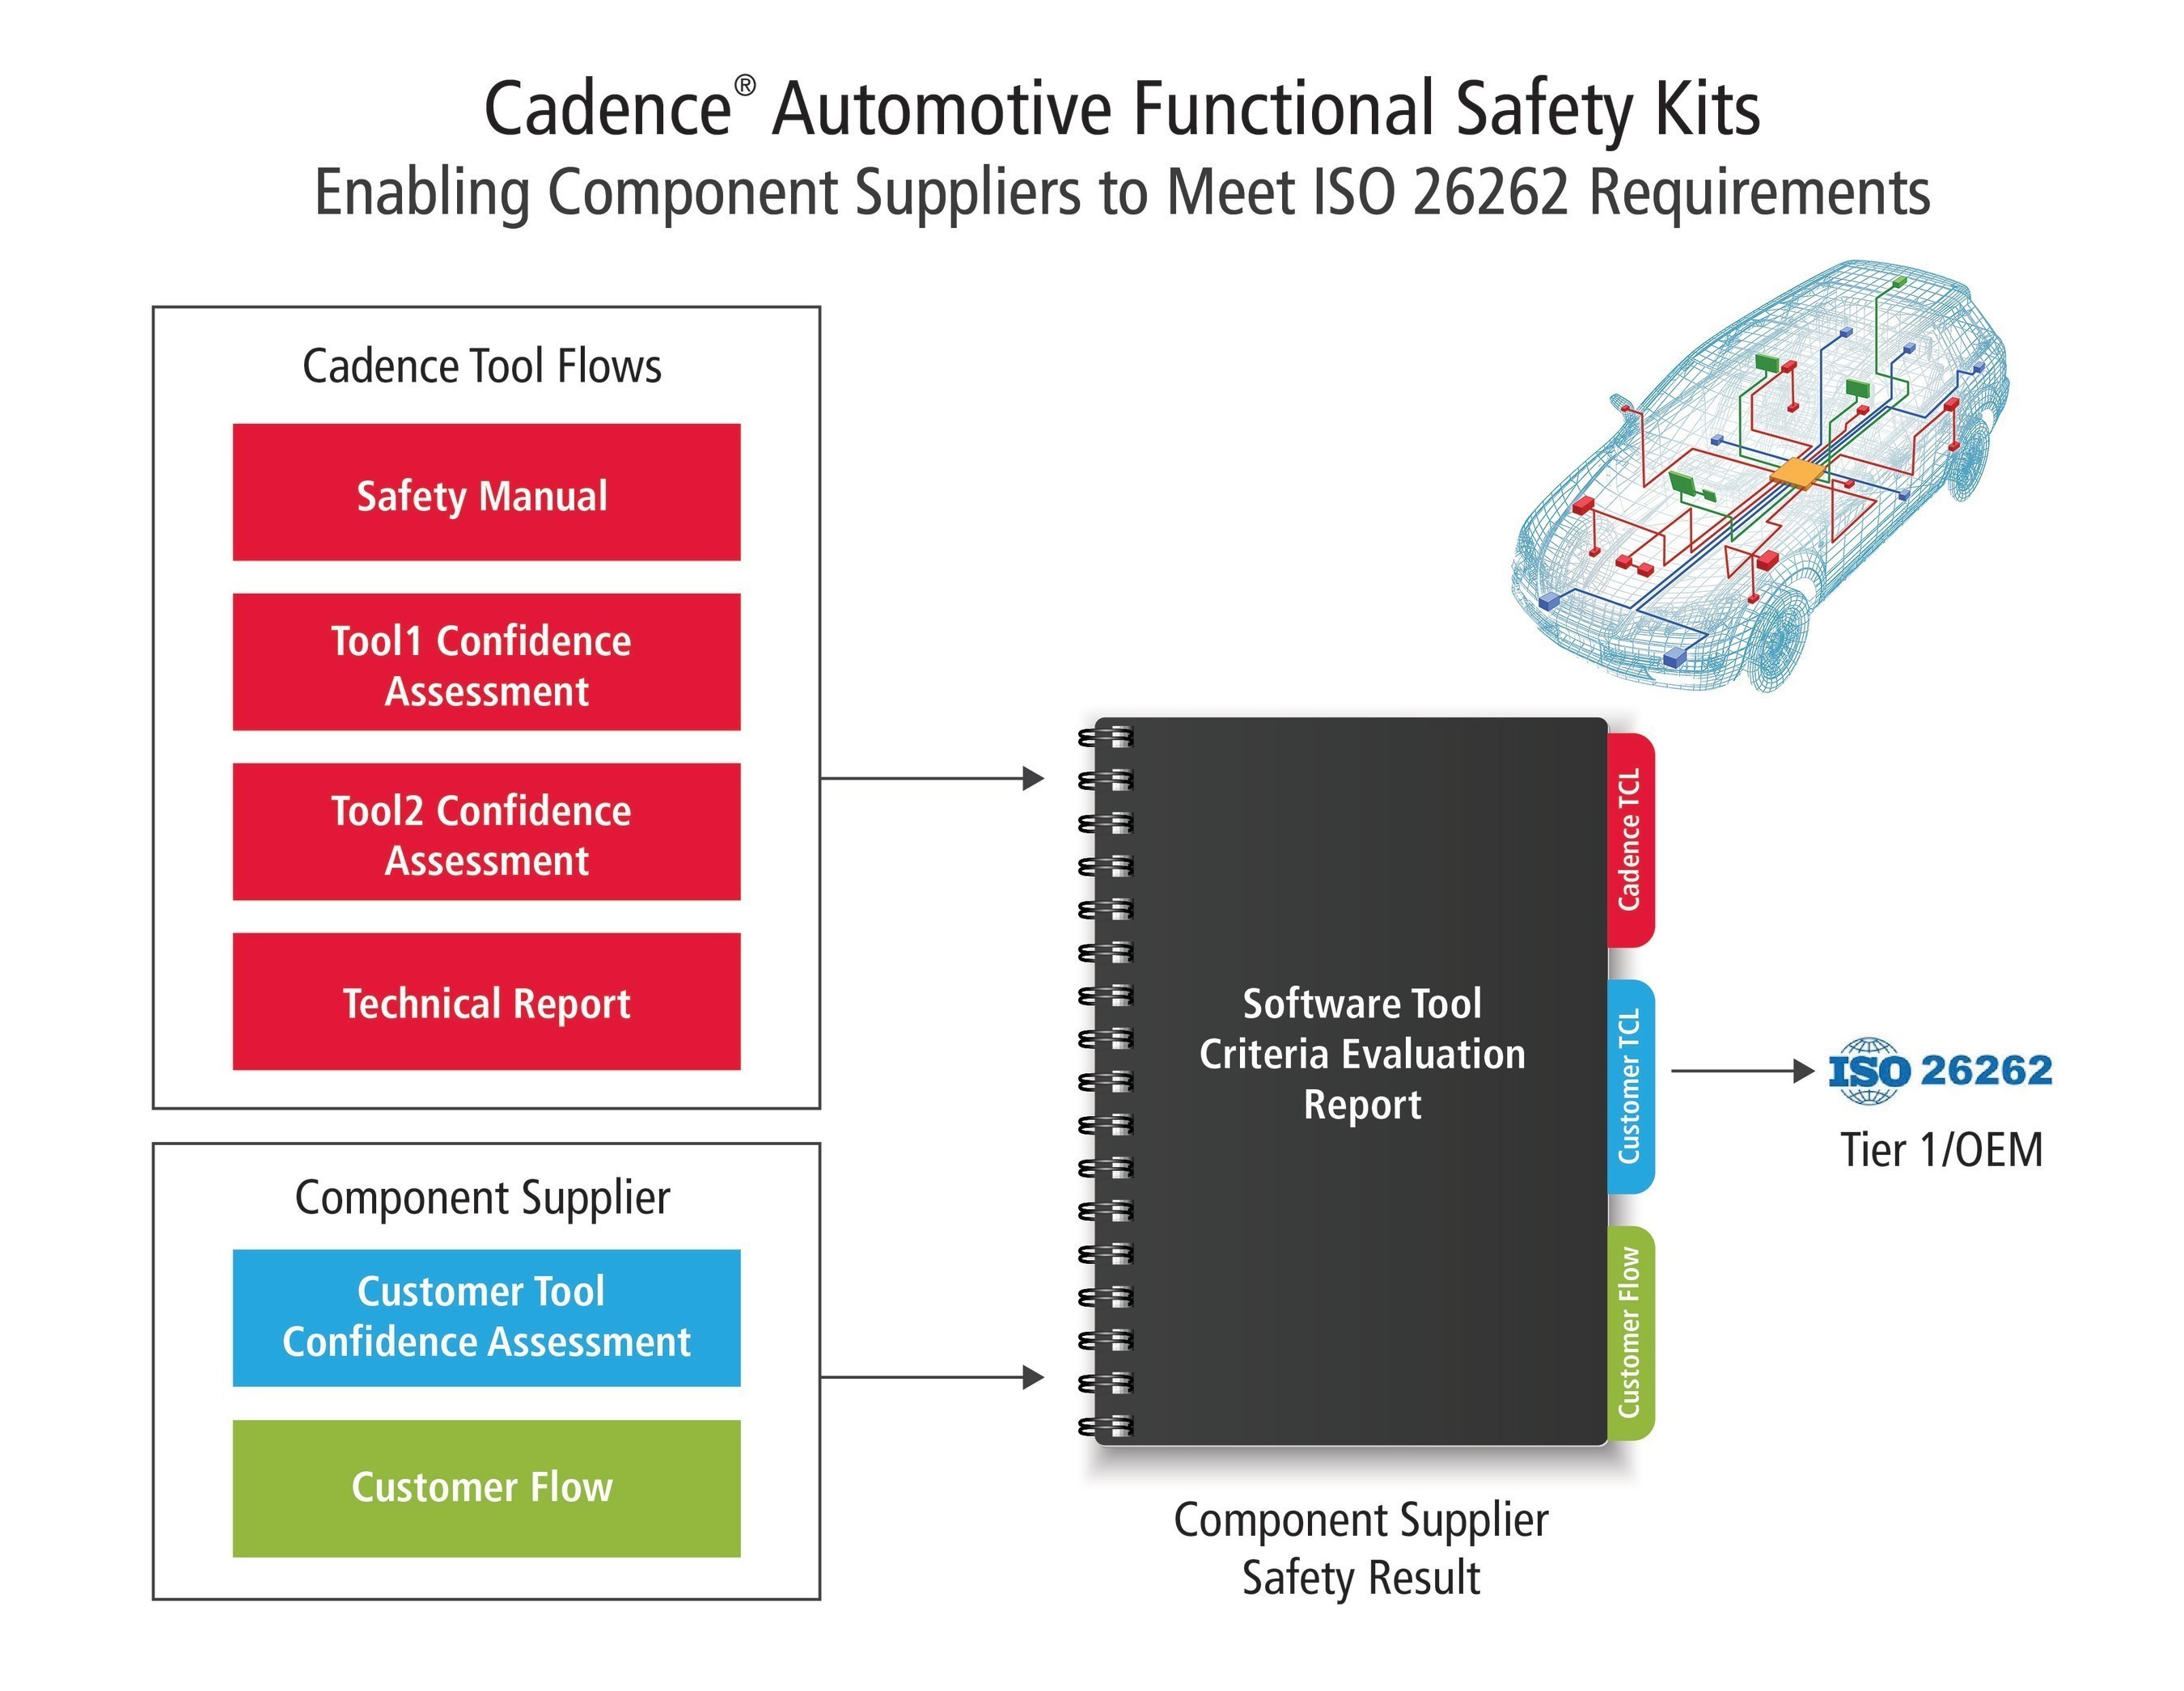 For a component supplier to achieve ISO 26262 certification, the development tools used must be formally assessed according to the standard. Once the Cadence tool evaluation is complete, more than 30 of its EDA tools will contribute to an ISO 26262 compliant development lifecycle, offering the broadest tool support for the automotive industry.